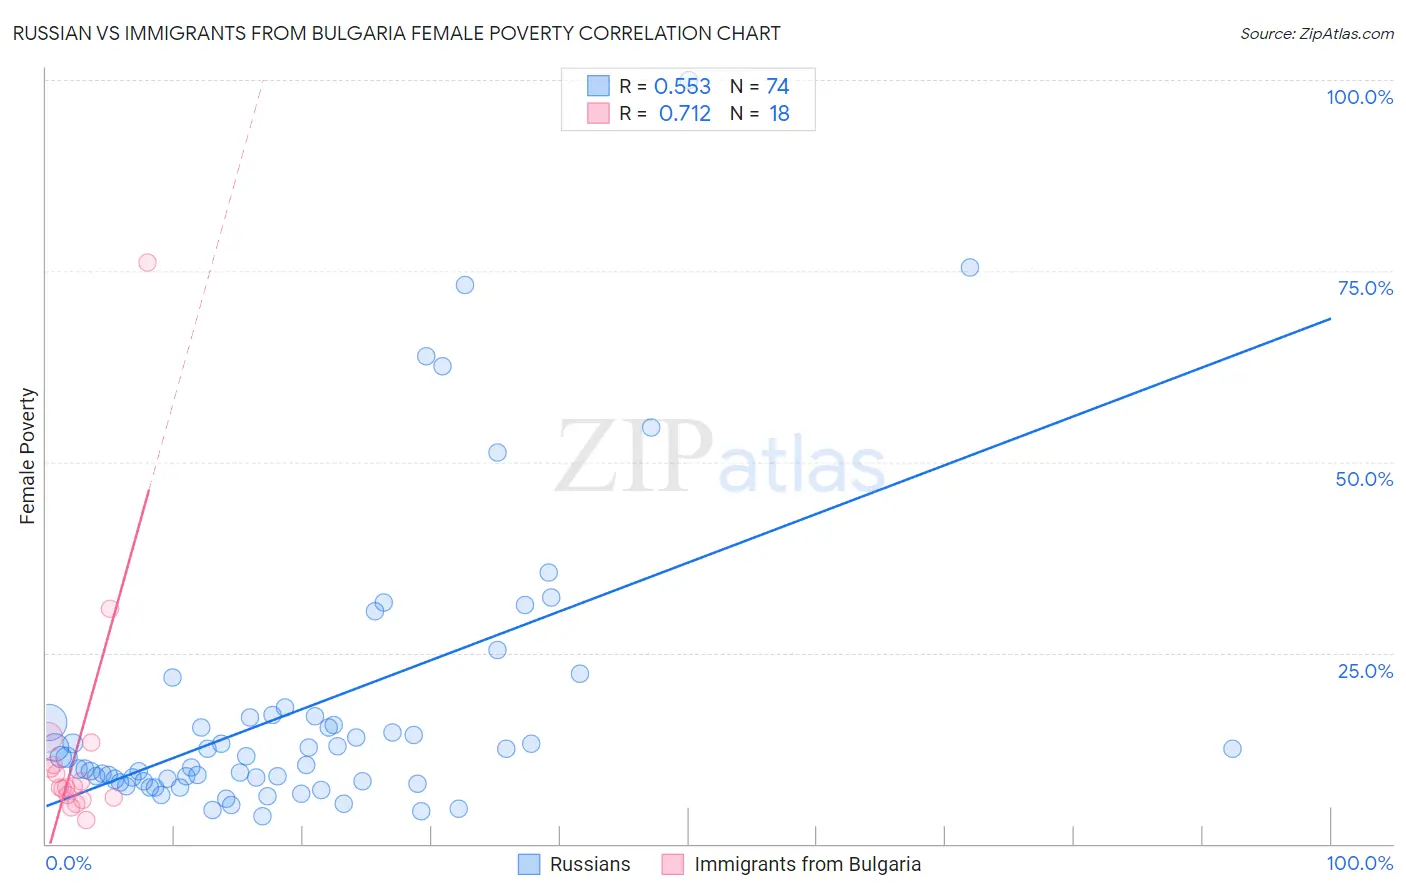 Russian vs Immigrants from Bulgaria Female Poverty